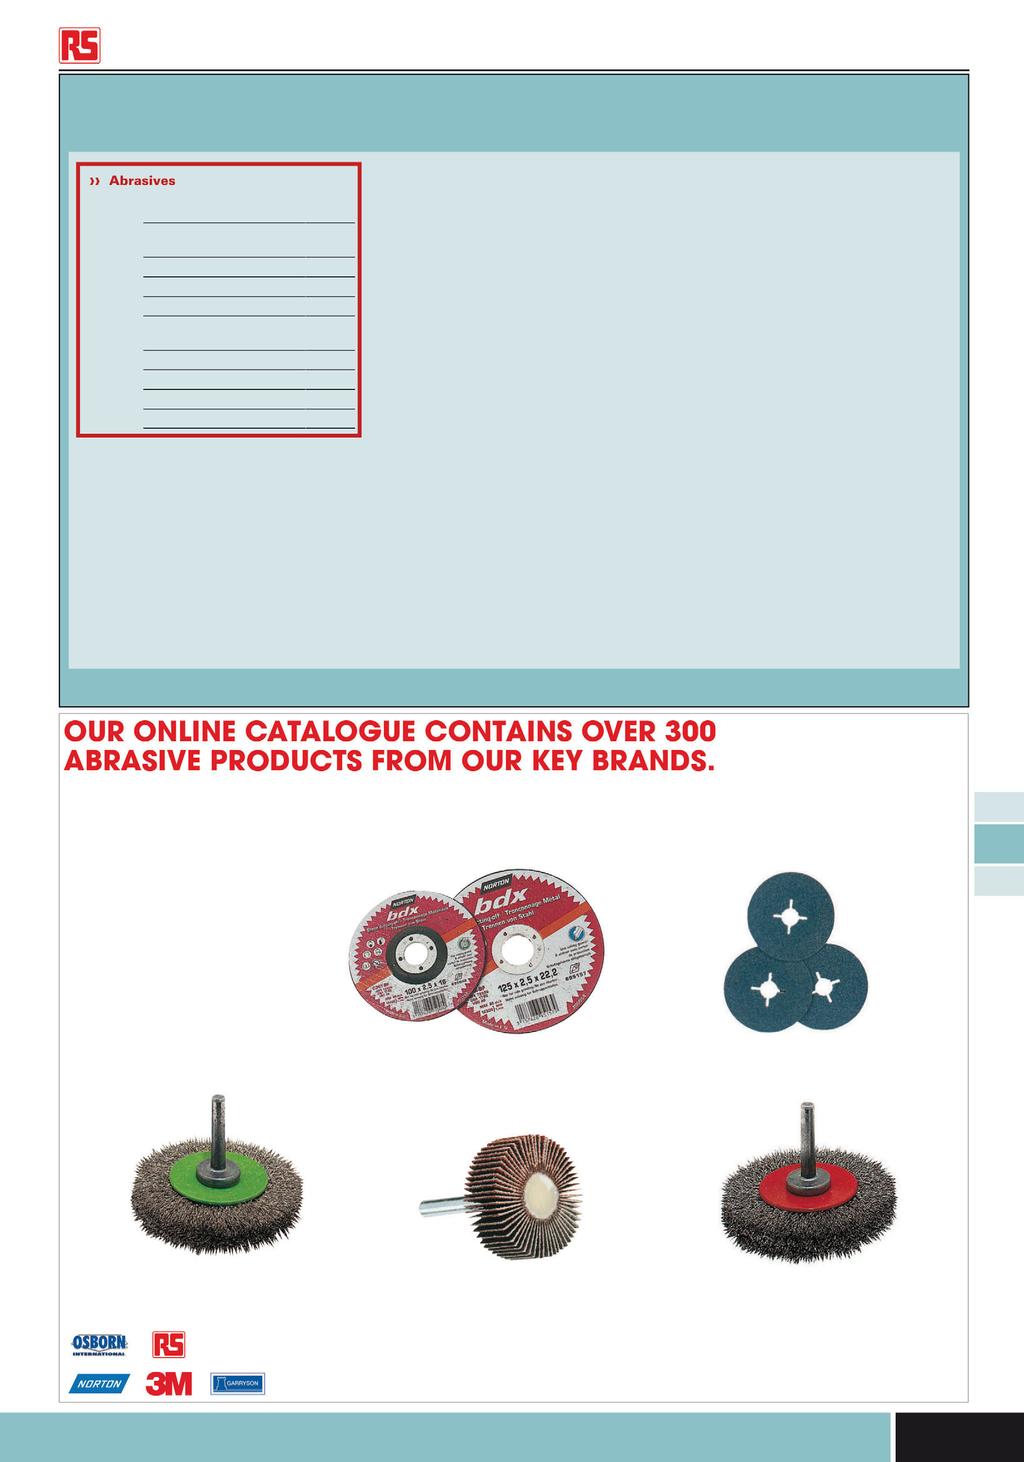 INTERNATIONAL ORDERLINE Abrasives & Engineering Materials Abrasives - contents Abrasives Drill and Die Grinder- Abrasives & Wire Brushes Angle Grinder - Discs, Flap Discs & Wire Brushes 2018 2018